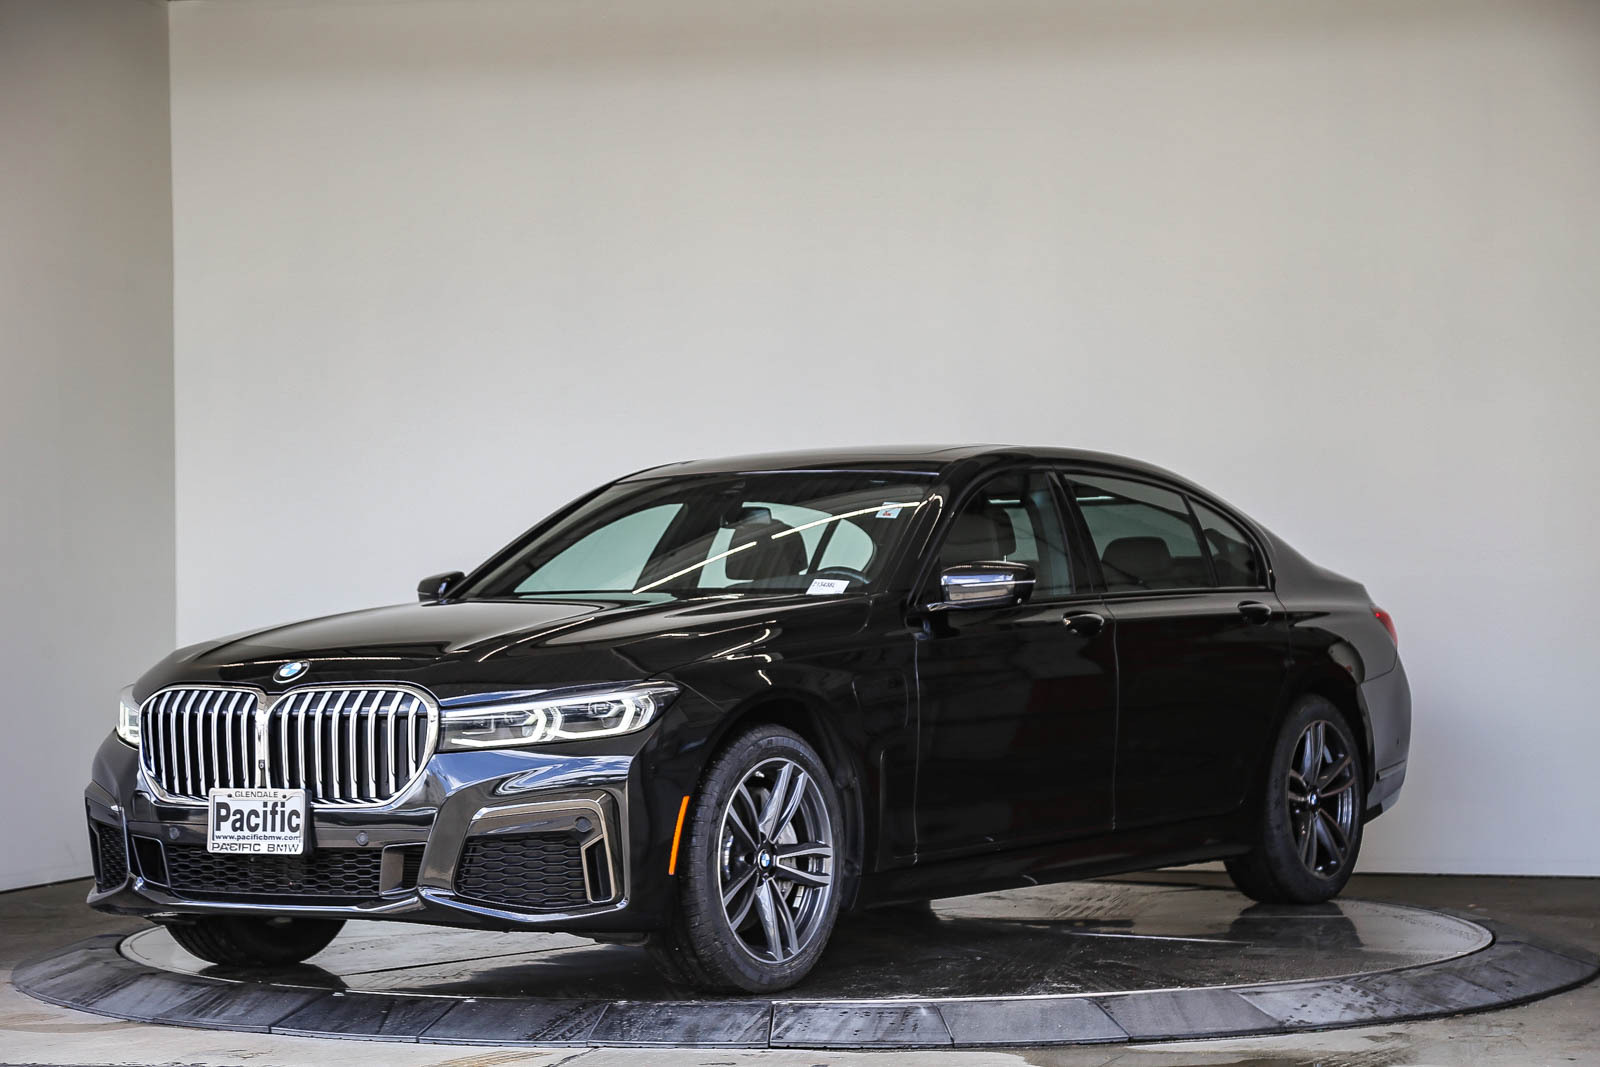 Certified Pre-Owned 2020 BMW 7 Series 745e xDrive iPerformance Plug-In Hy  4dr Car in Glendale #213438L | Pacific BMW